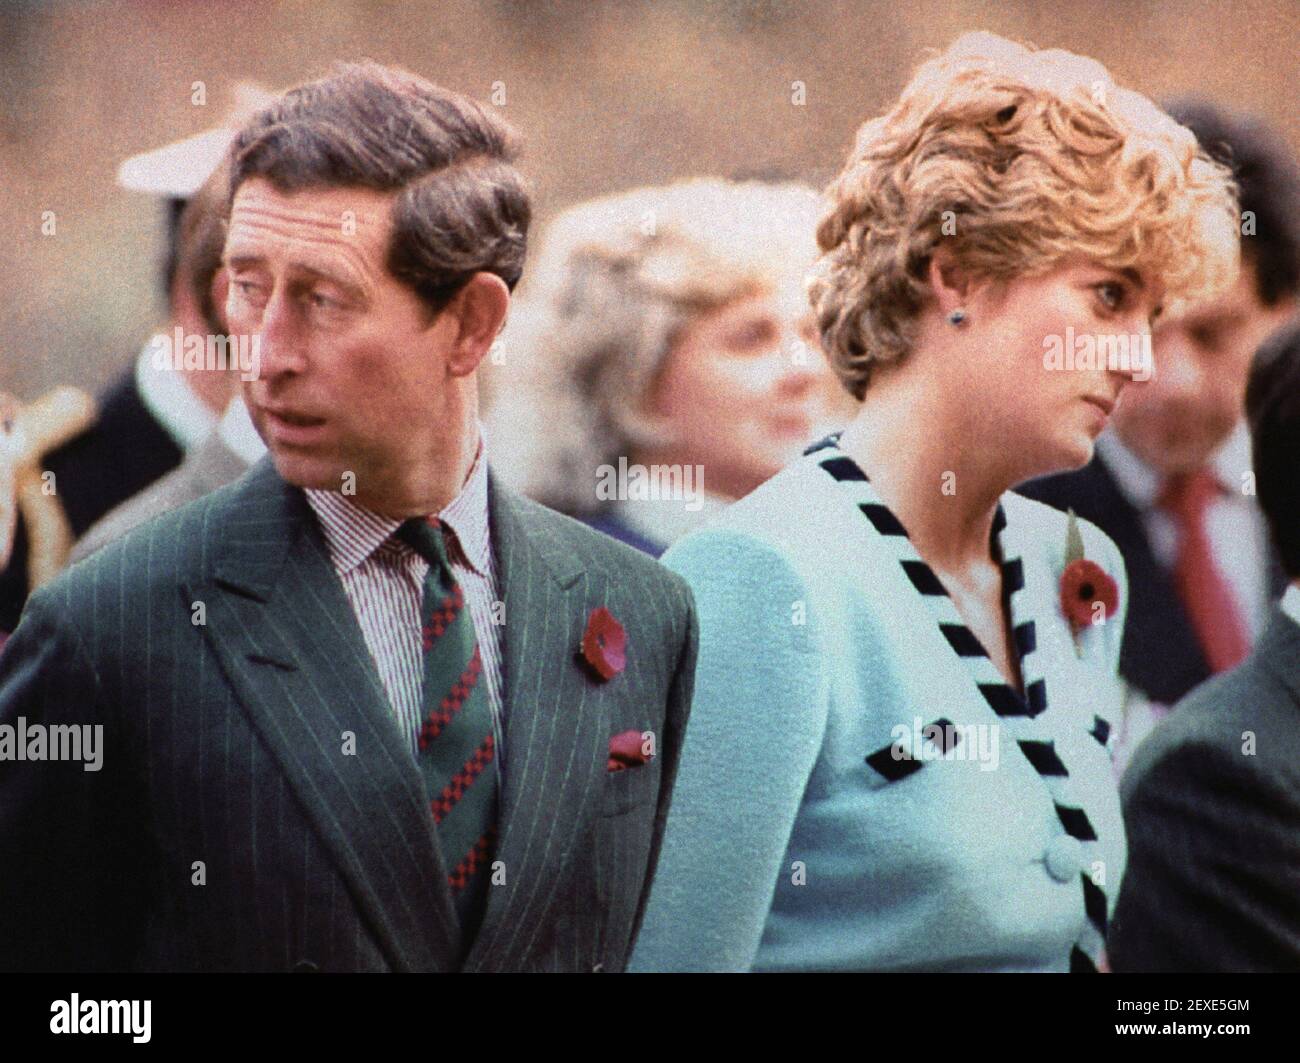 File photo dated 03/11/92 of the Prince and Princess of Wales look their separate ways during a memorial service on their tour of Korea. As the bitter fallout from Megxit worsens, the monarchy's troubles have been labelled the War of the Waleses 2.0. Stock Photo